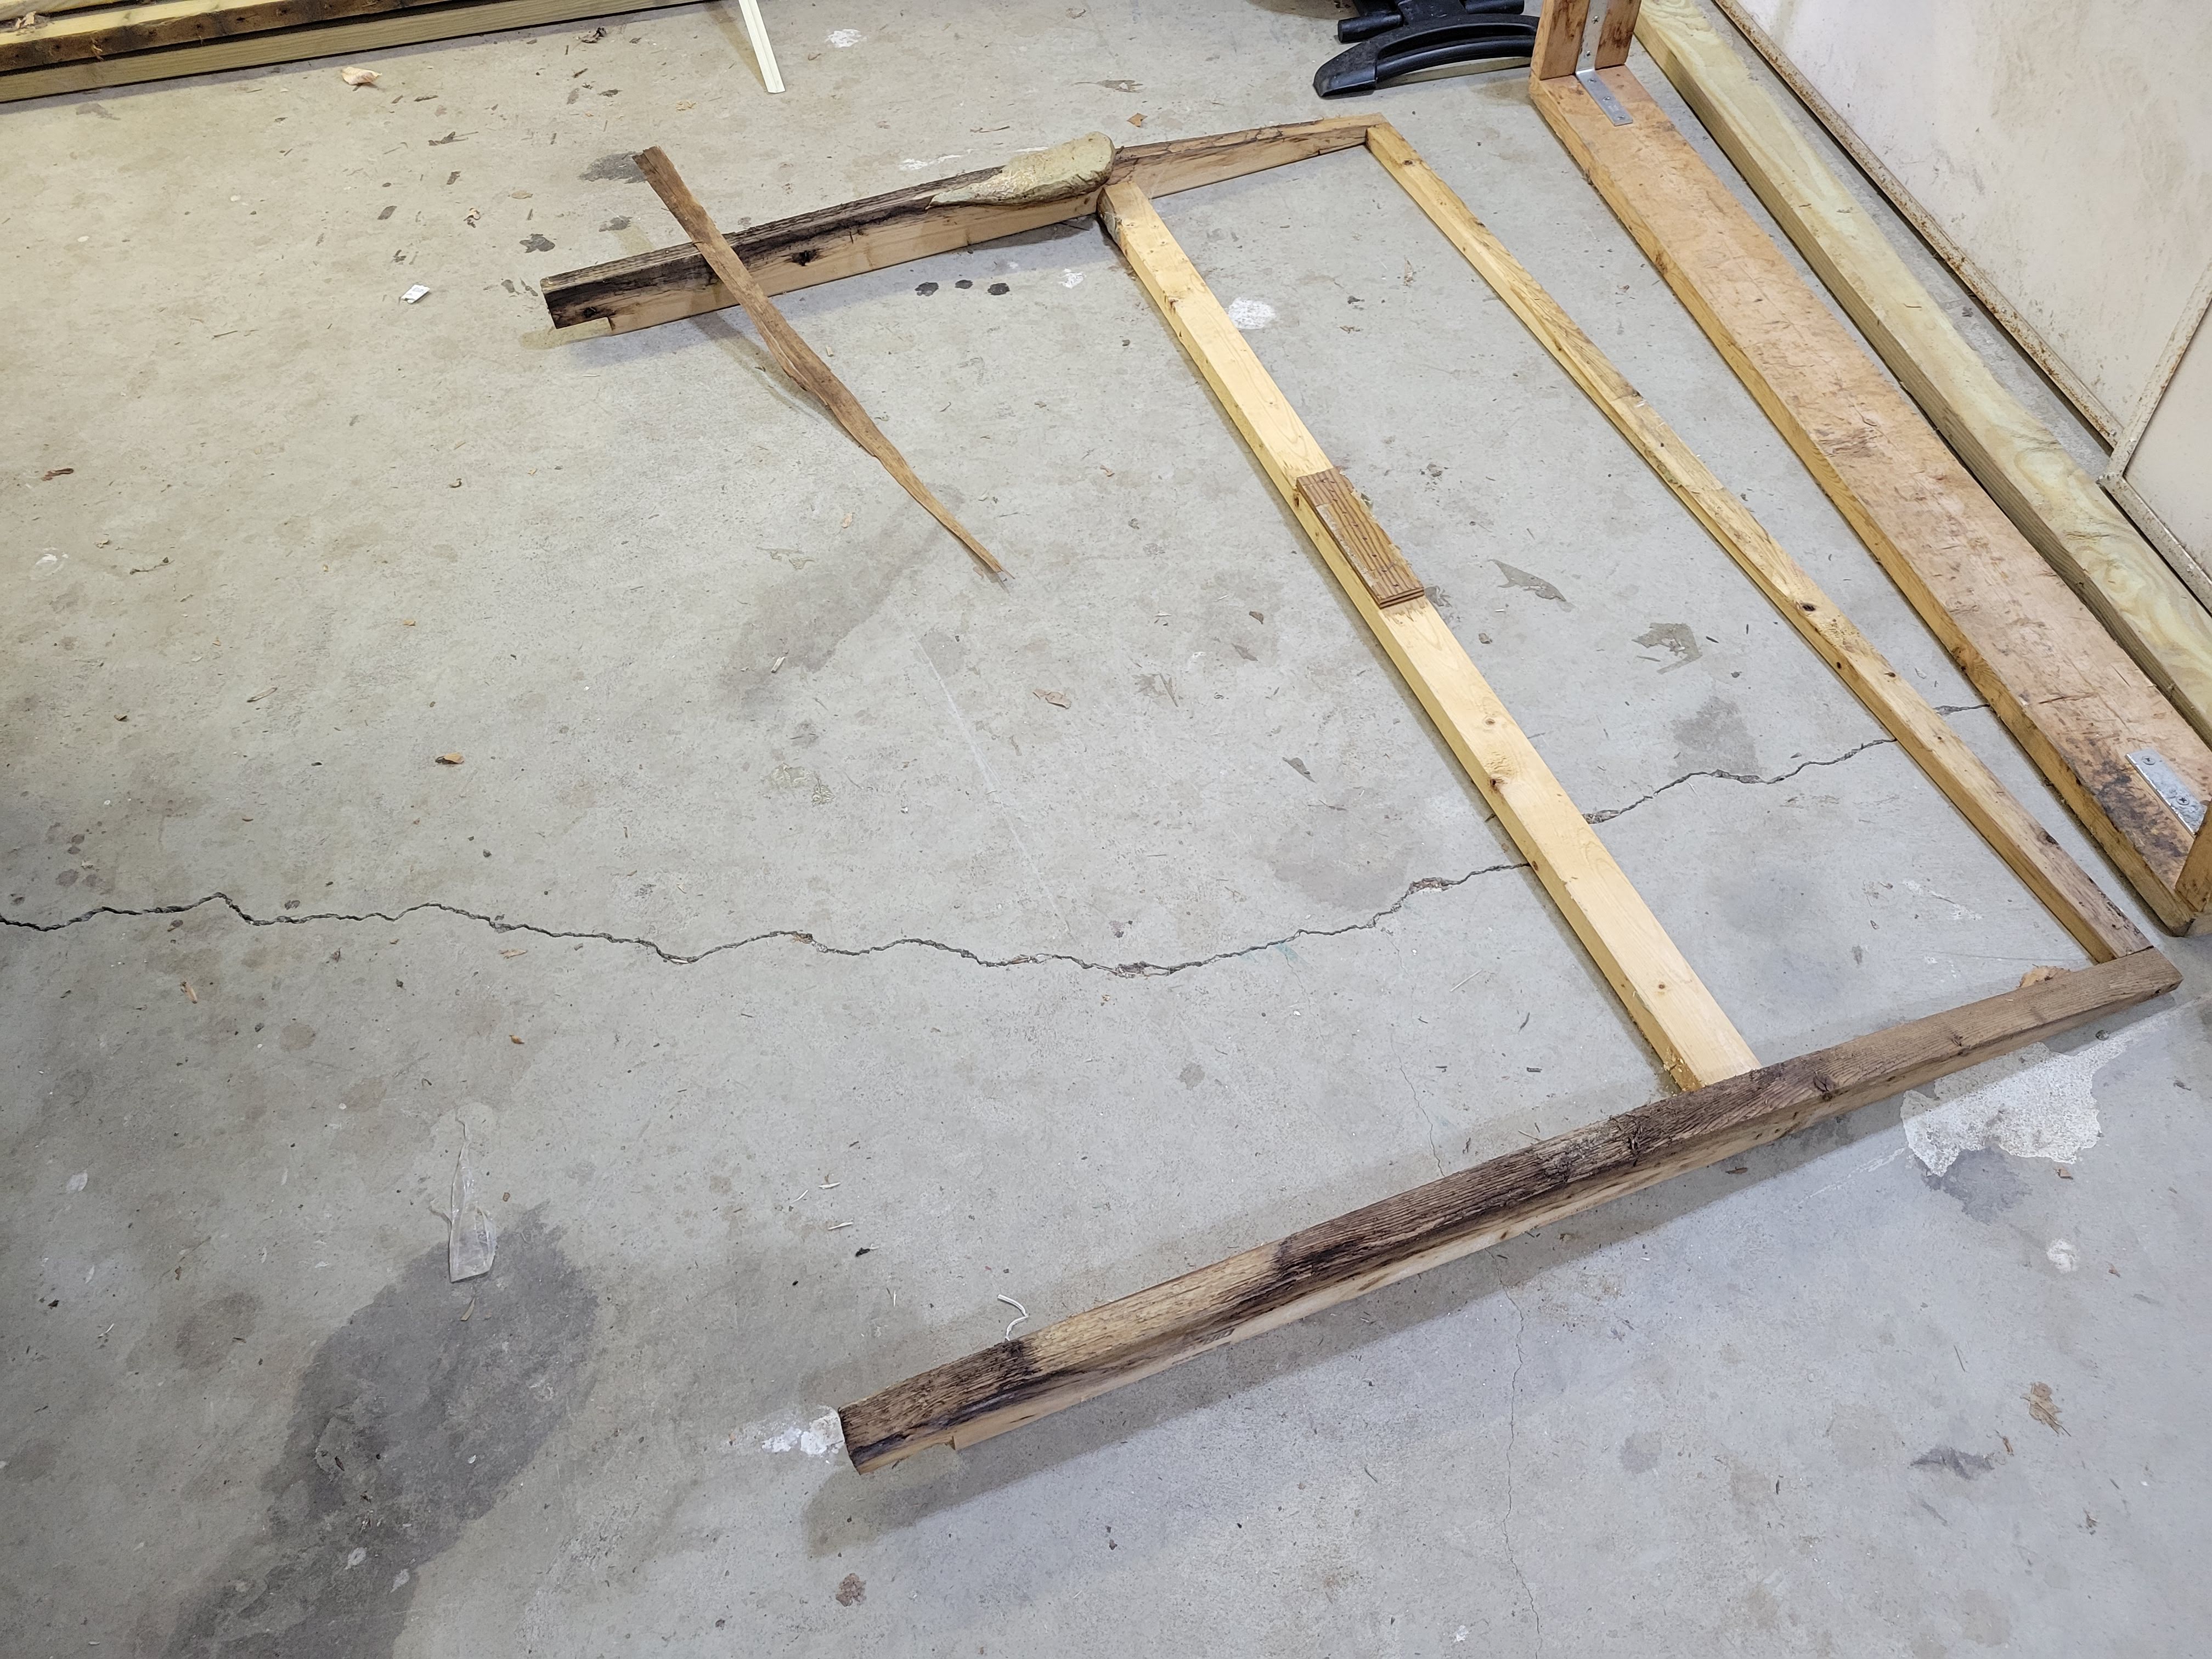 Rotted bed frame